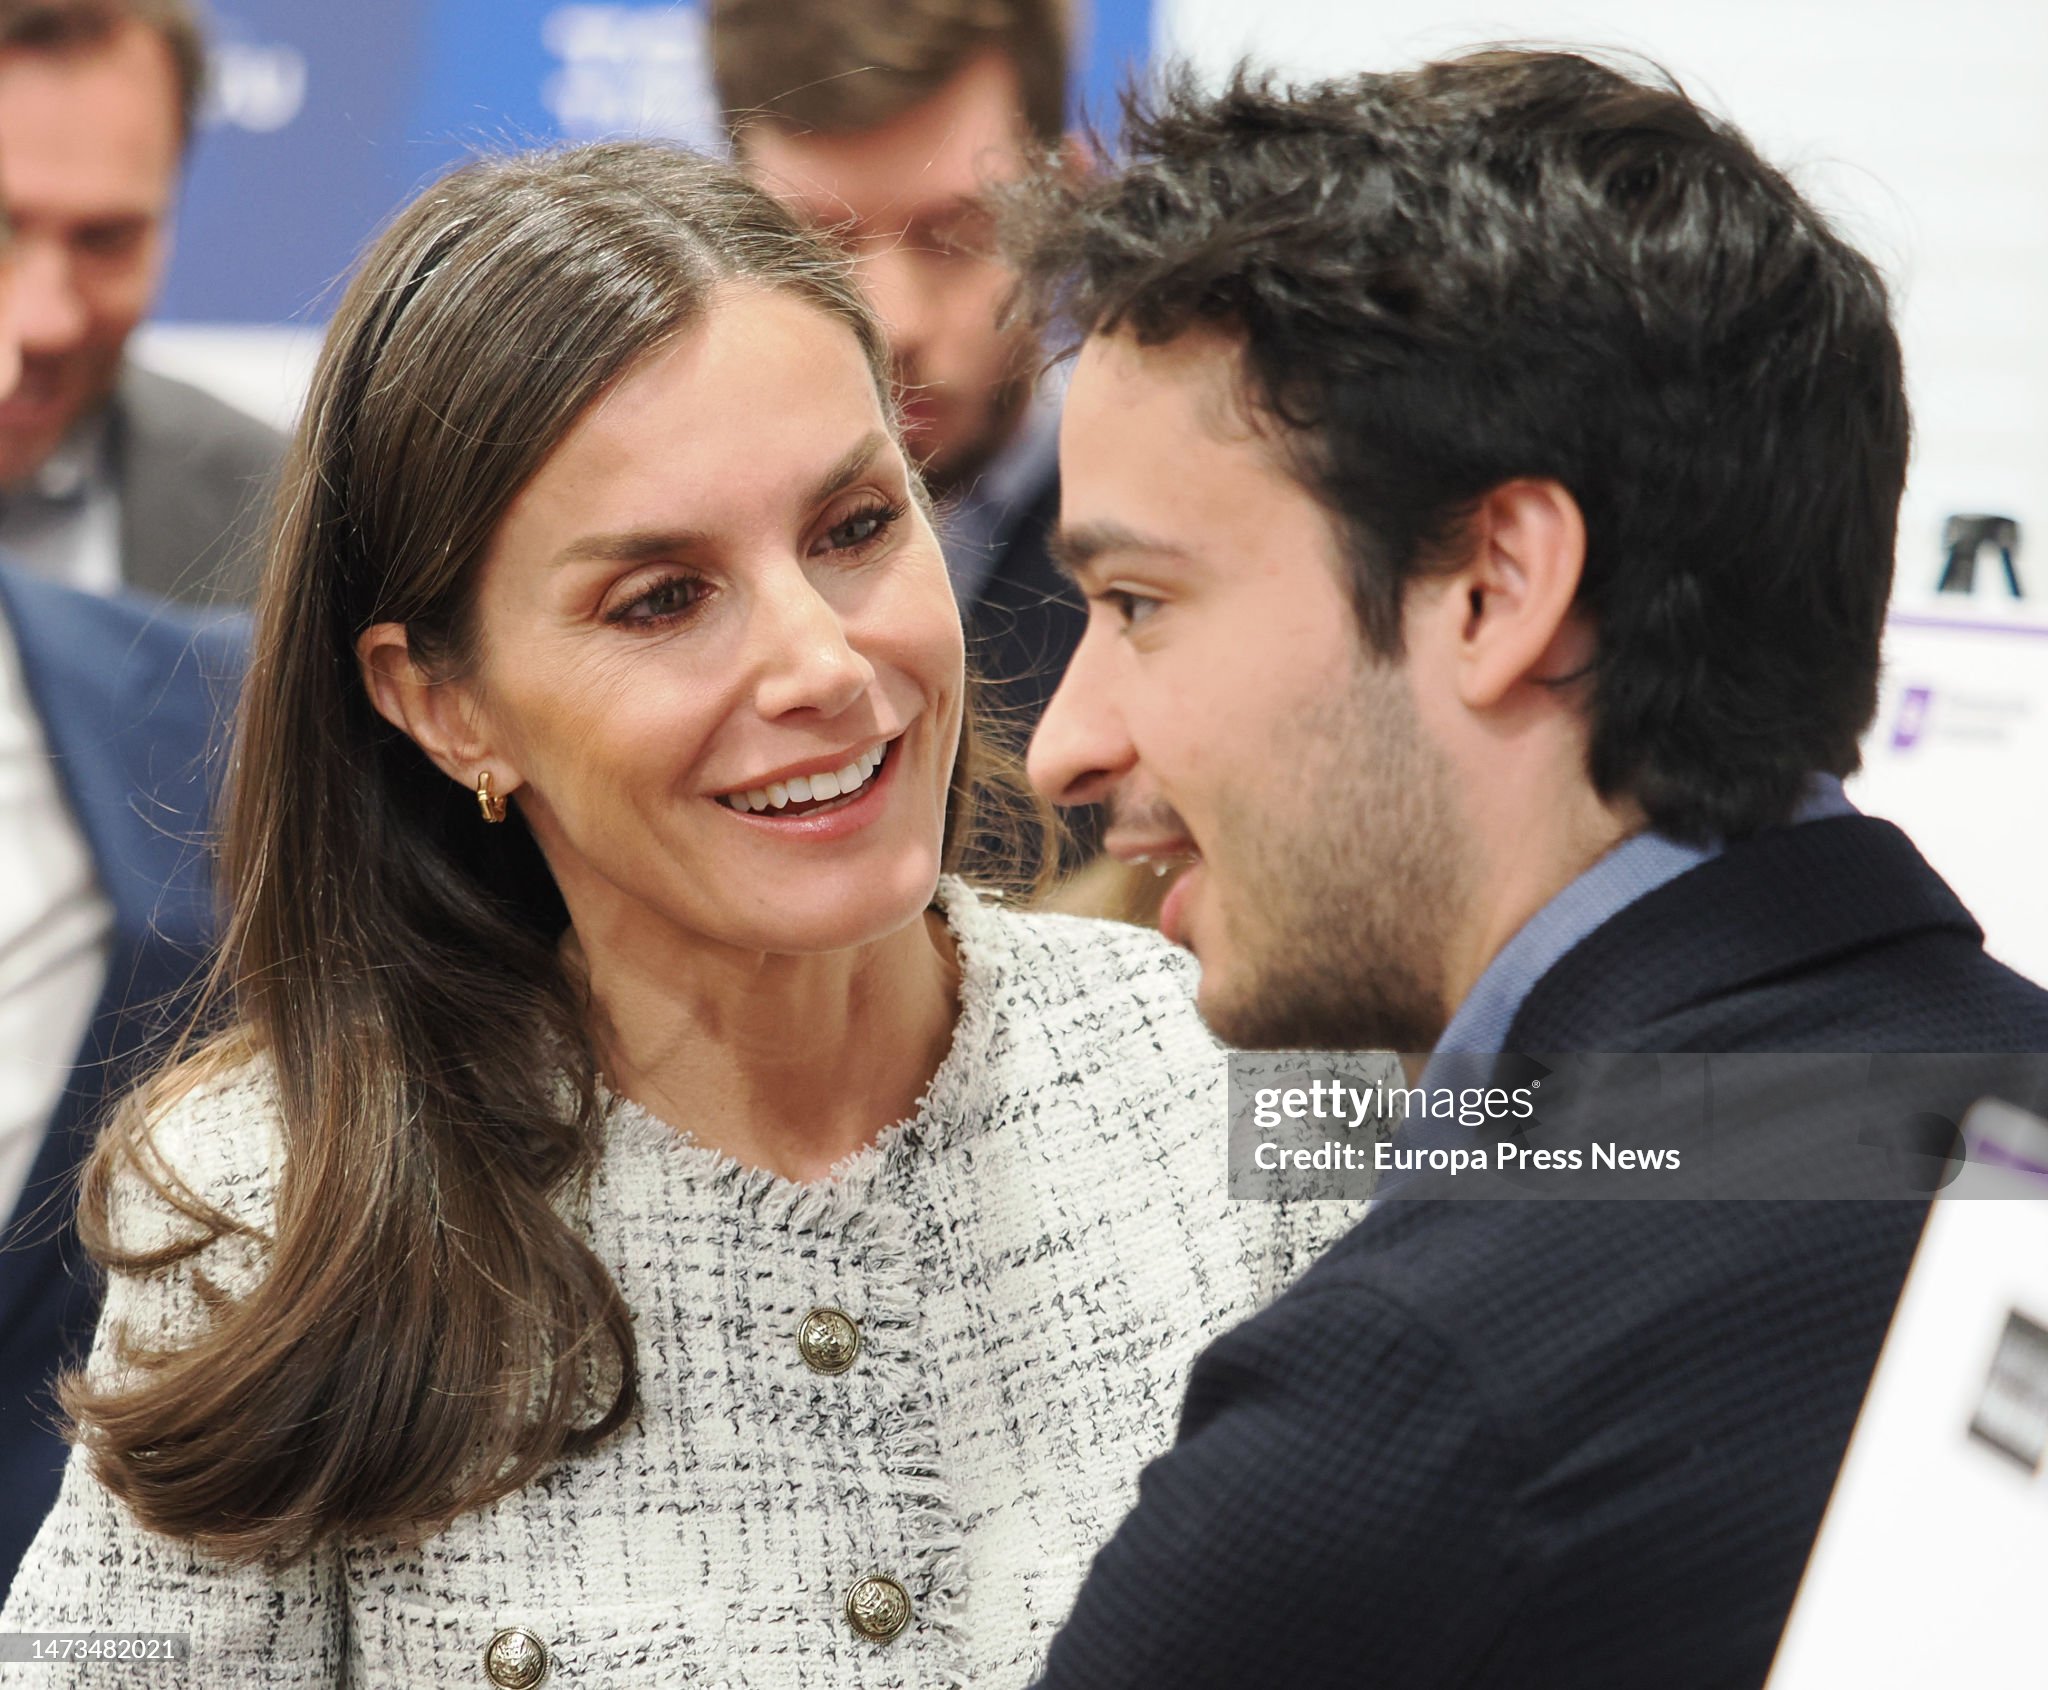 queen-letizia-attends-the-main-event-of-the-second-stage-of-the-tour-of-talent.jpg